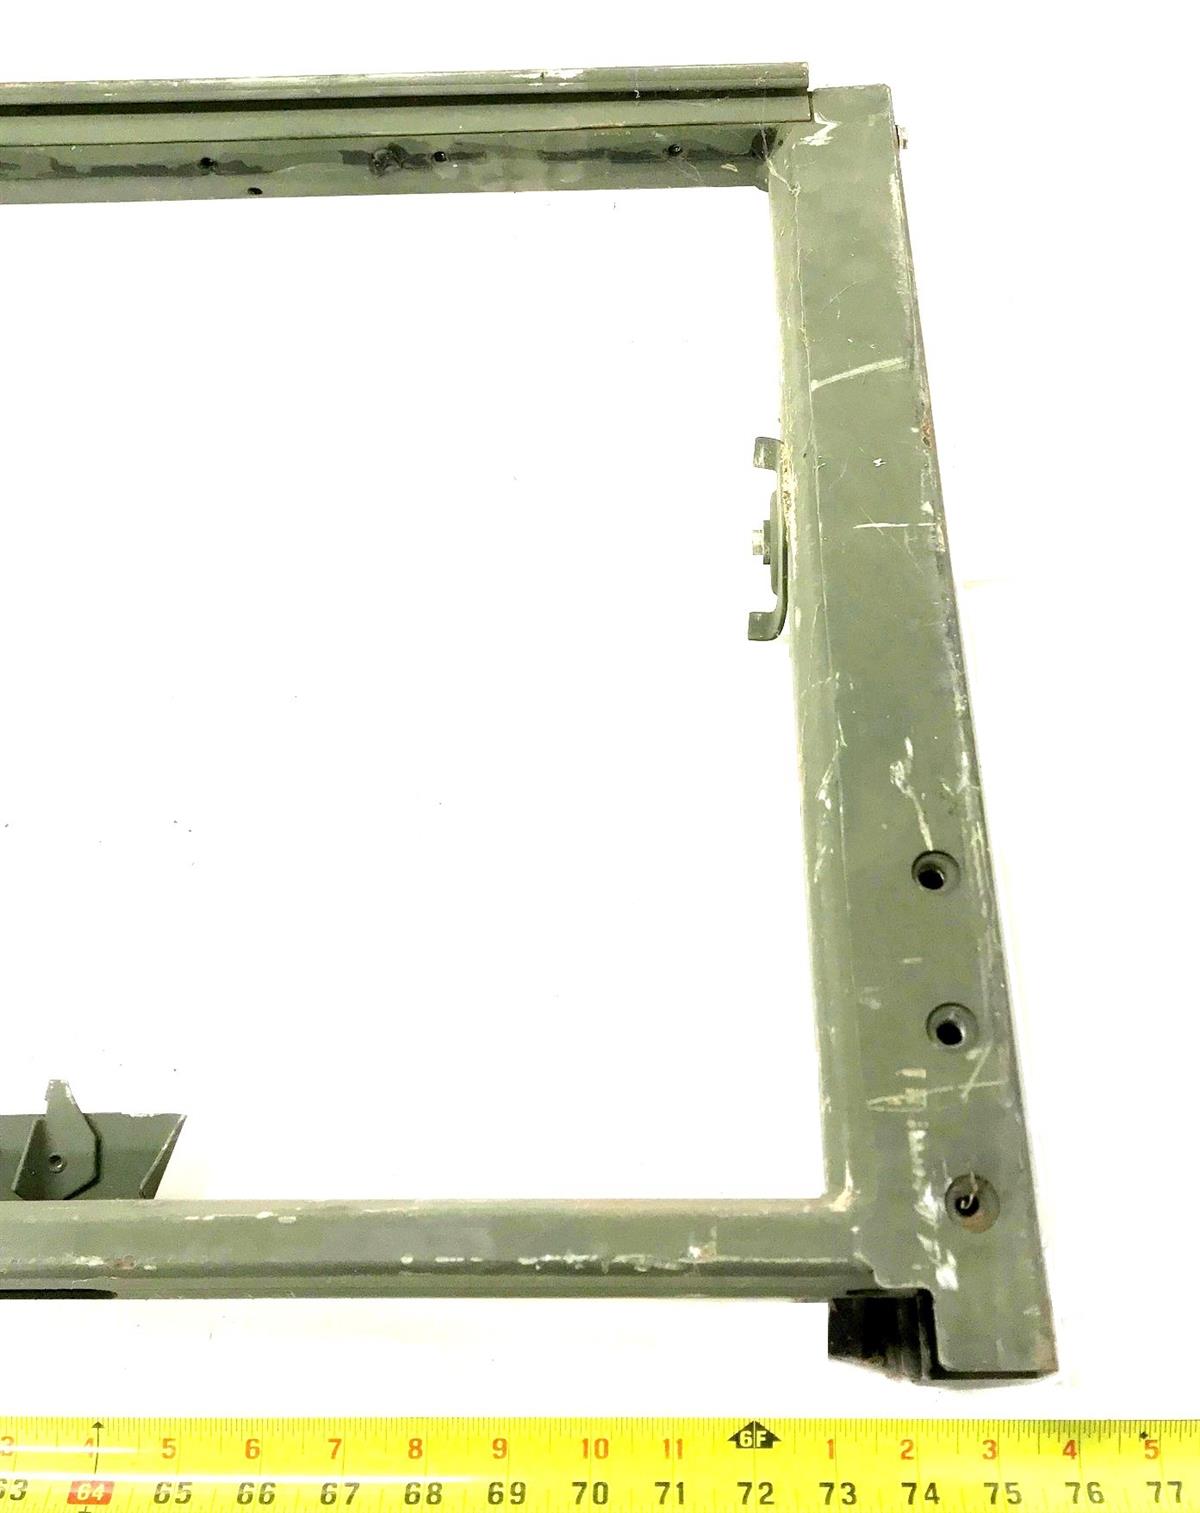 9M-878 | 9M-878  M939 Series 5 Ton Outer Windshield Frame  (4)(USED).jpg